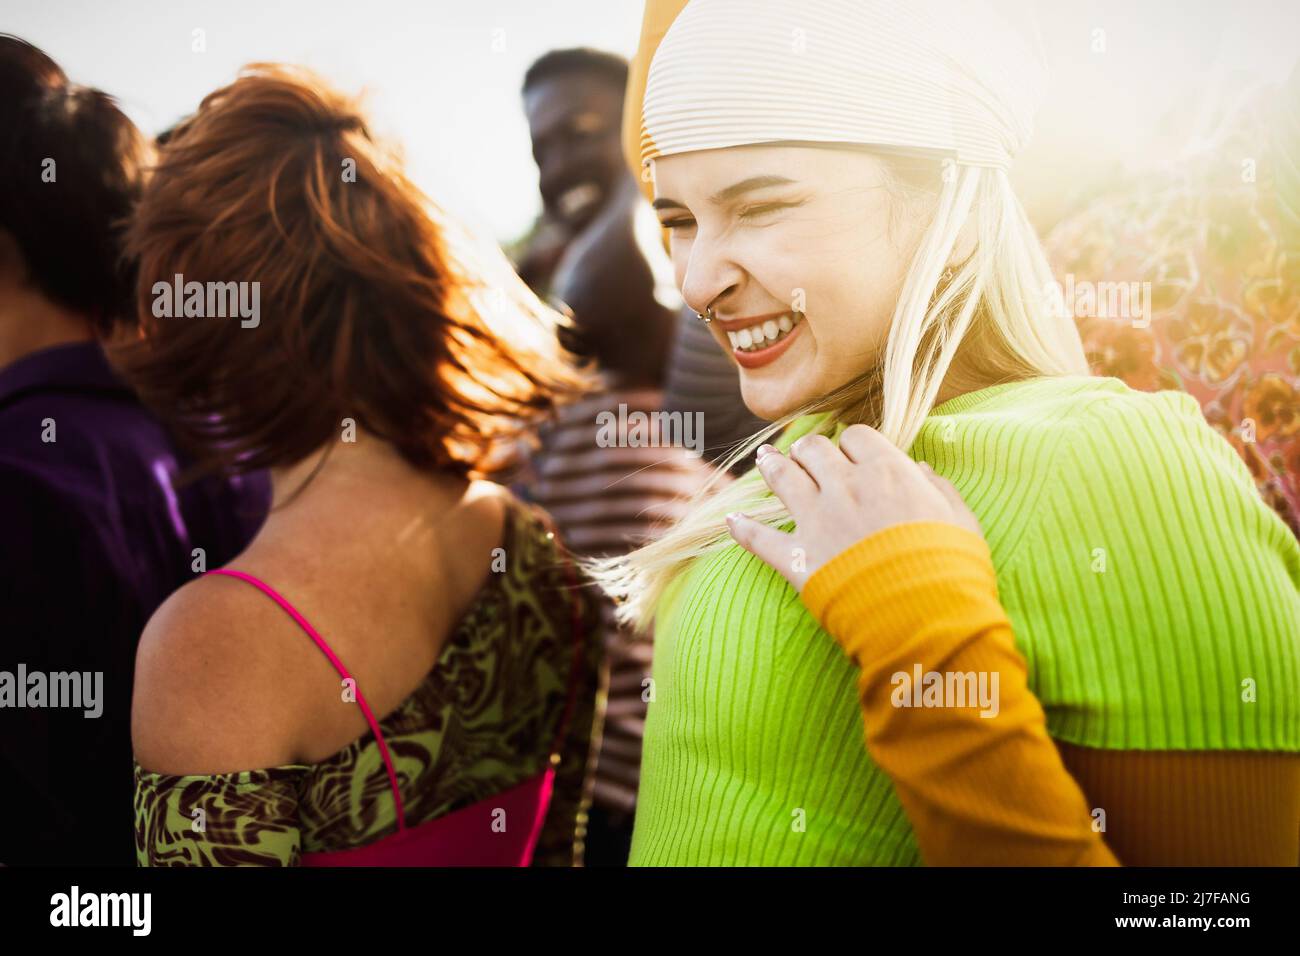 Happy young diverse friends having fun hanging out together - Youth people millennial generation concept Stock Photo